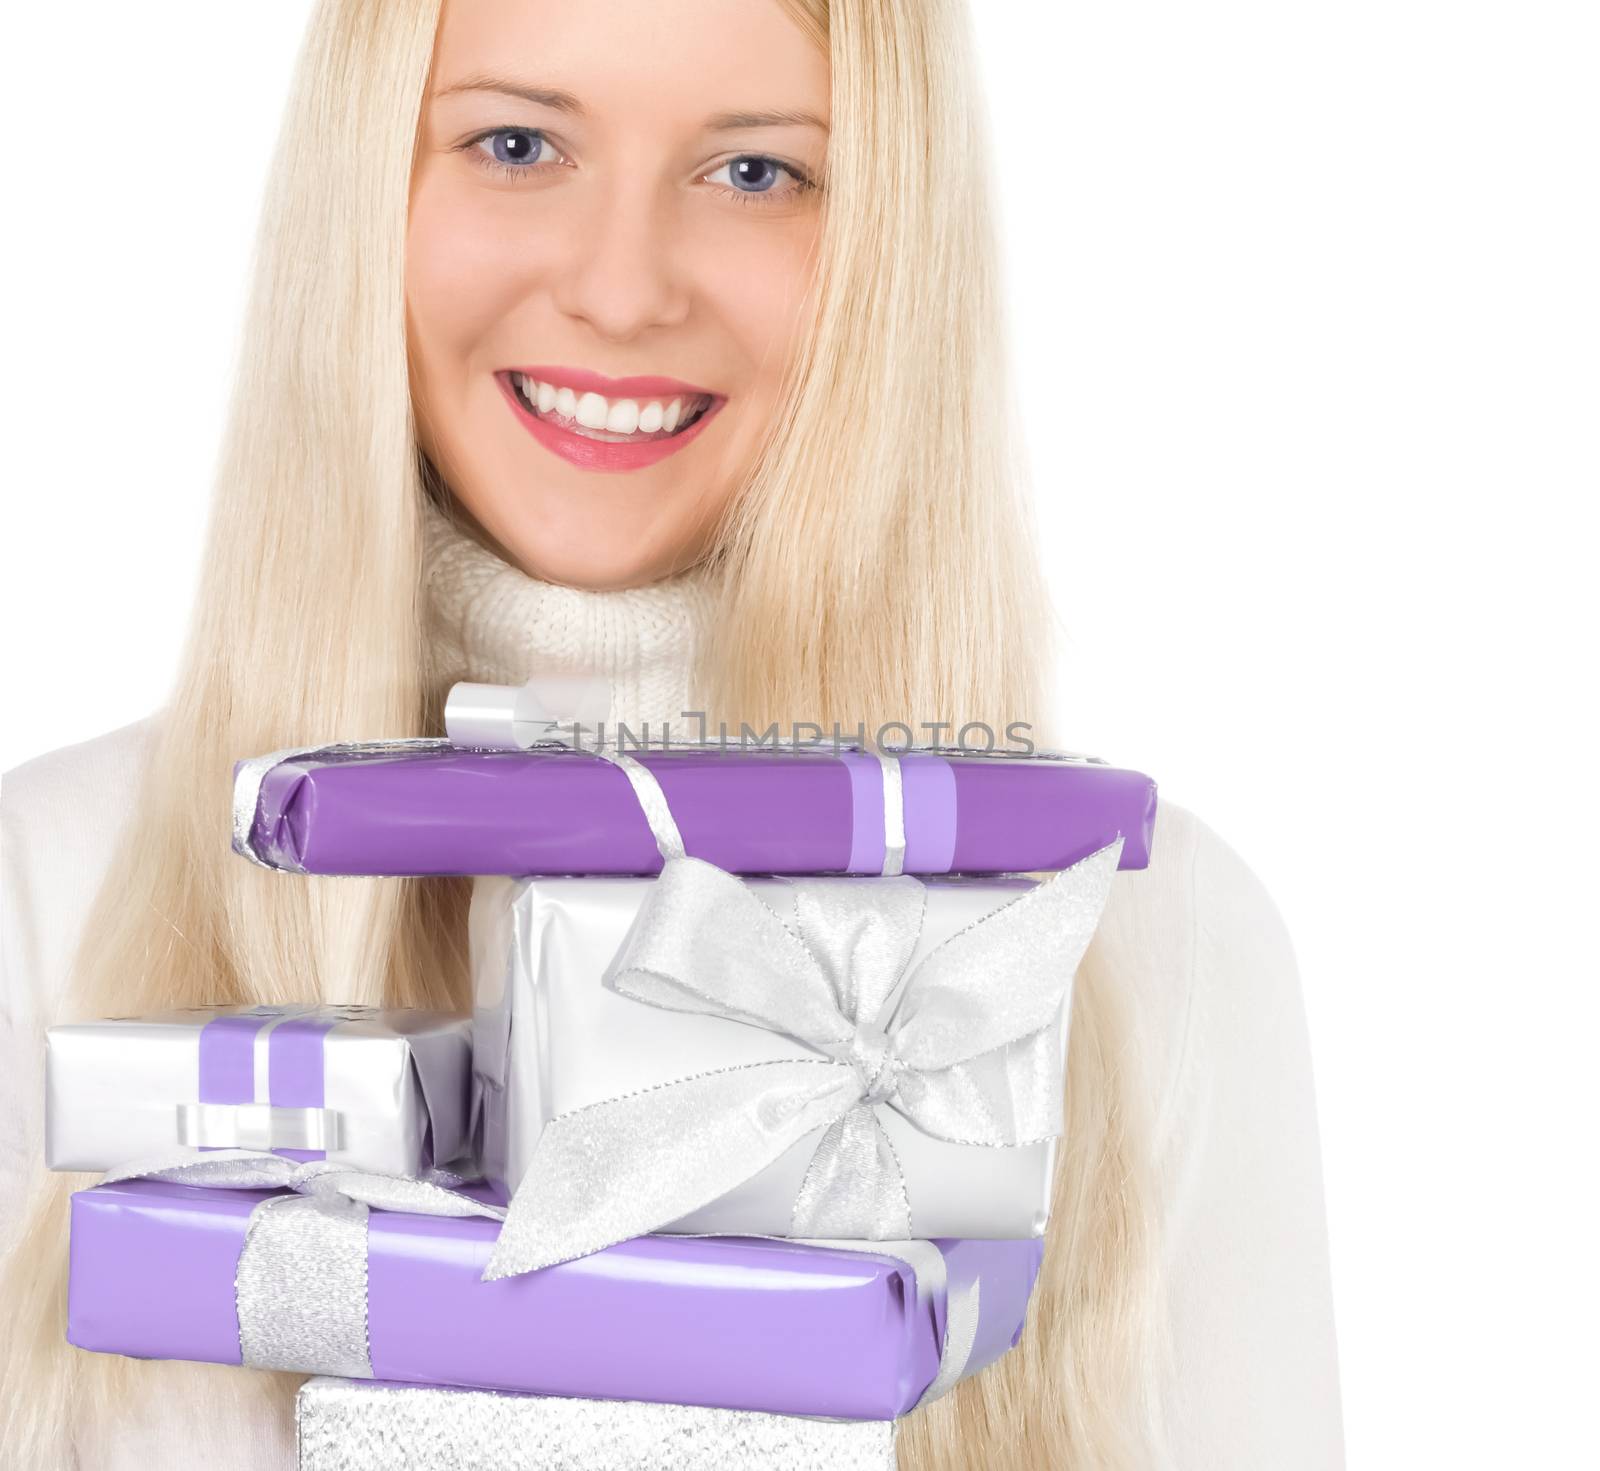 Young blonde girl with gift boxes in Christmas, woman and presents in winter season for shopping sale and holiday brands